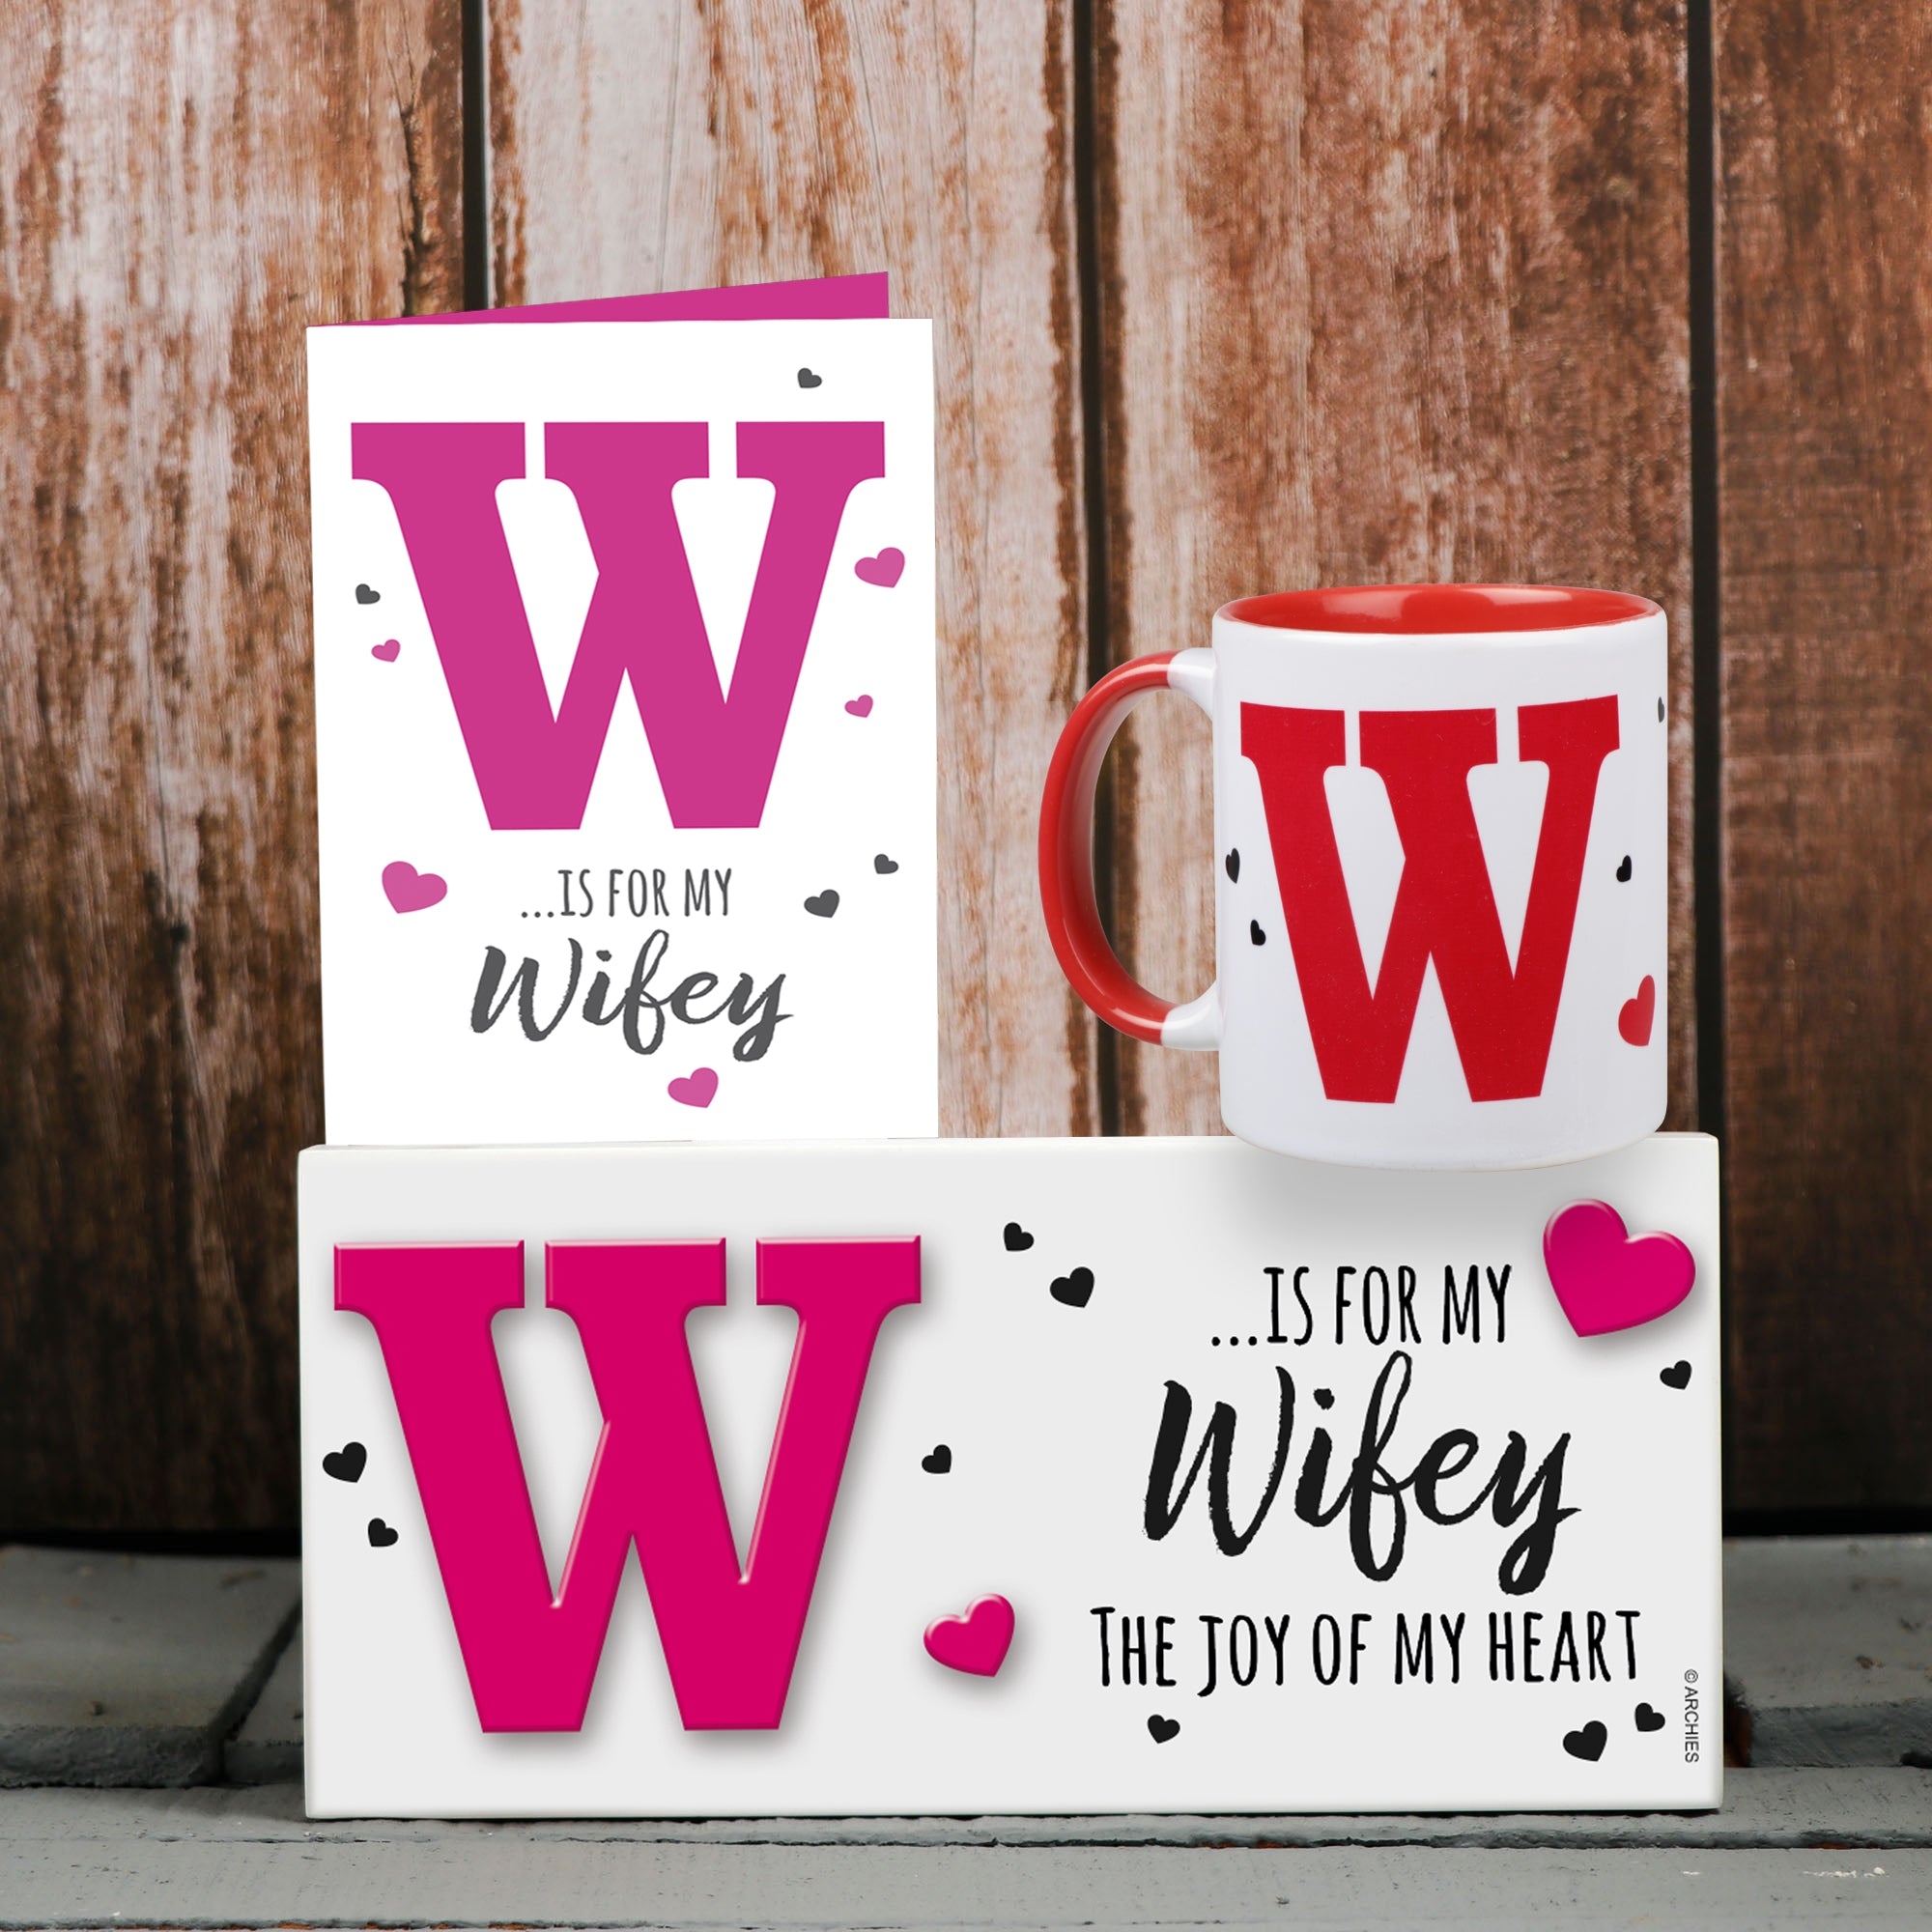 Archies | Archies KEEP SAKE Wife Gift Combo with Ceramic Mug and Elevated Initial Quotation - with a FREE GREETING CARD 0